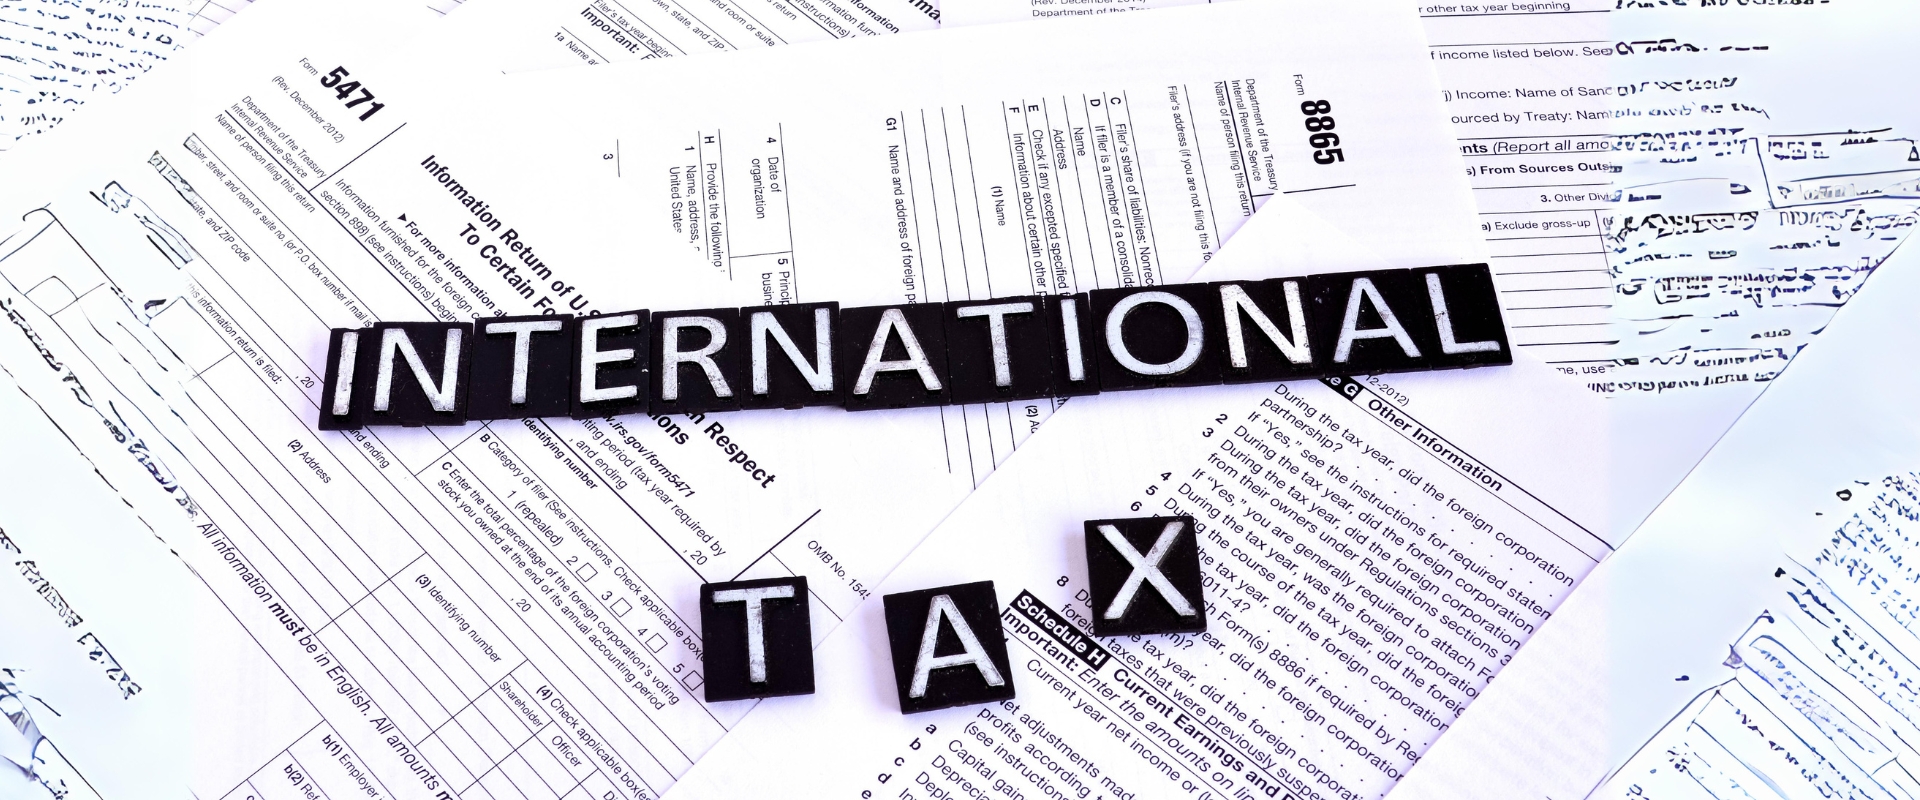 Let's Understand The International Tax System for Multinational Companies